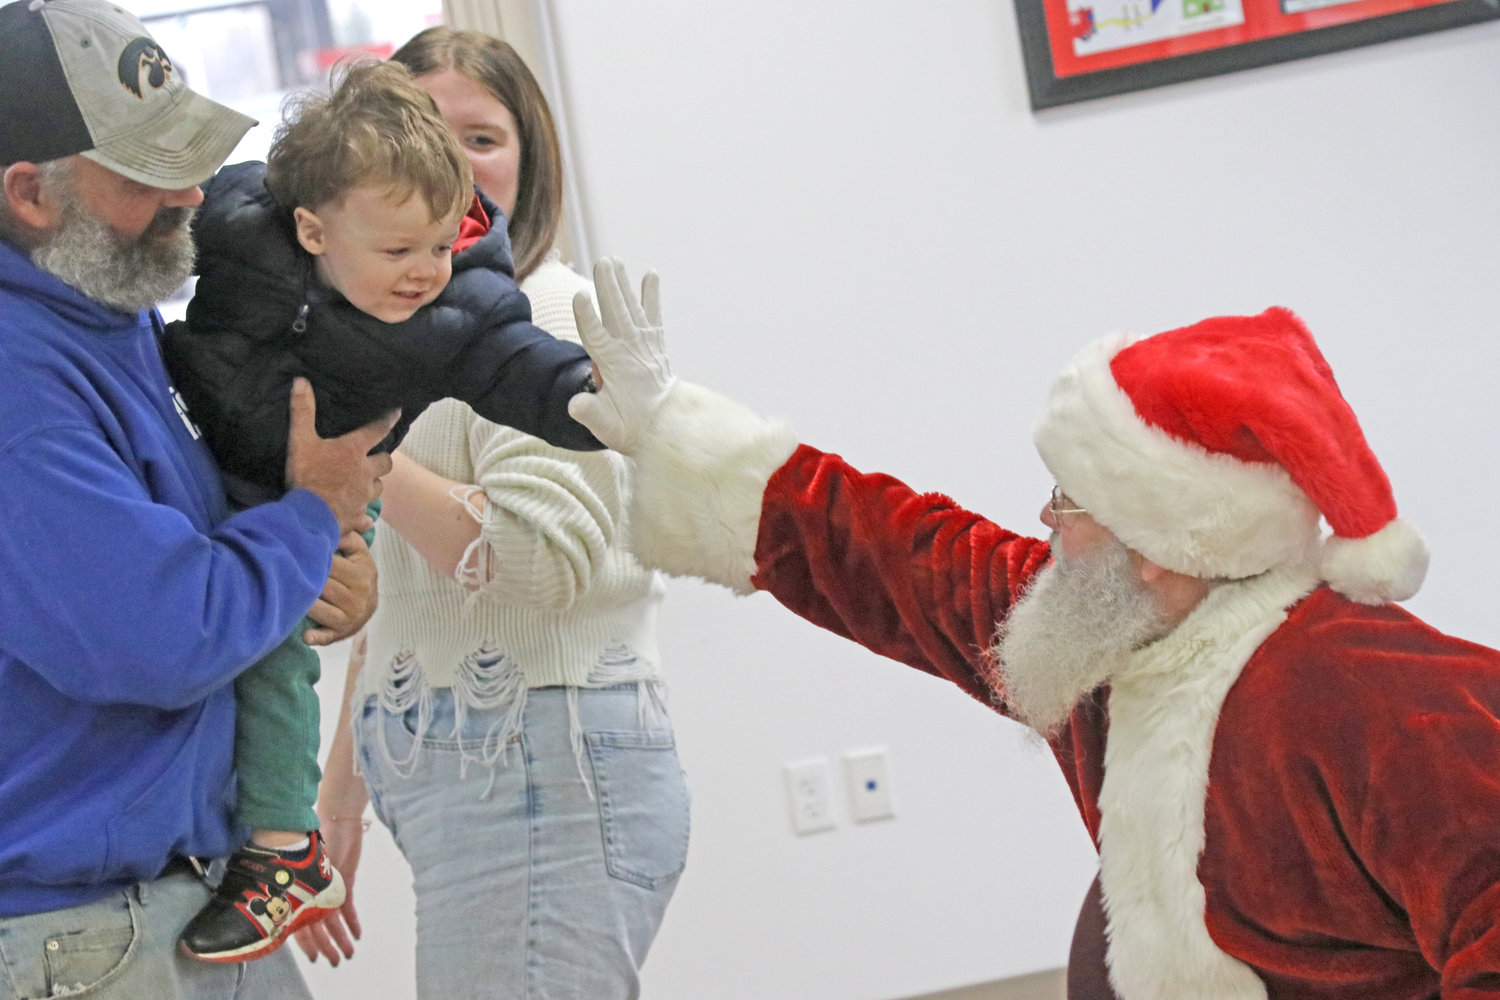 A high-five seals the deal: Santa is going to come through for this little guy.